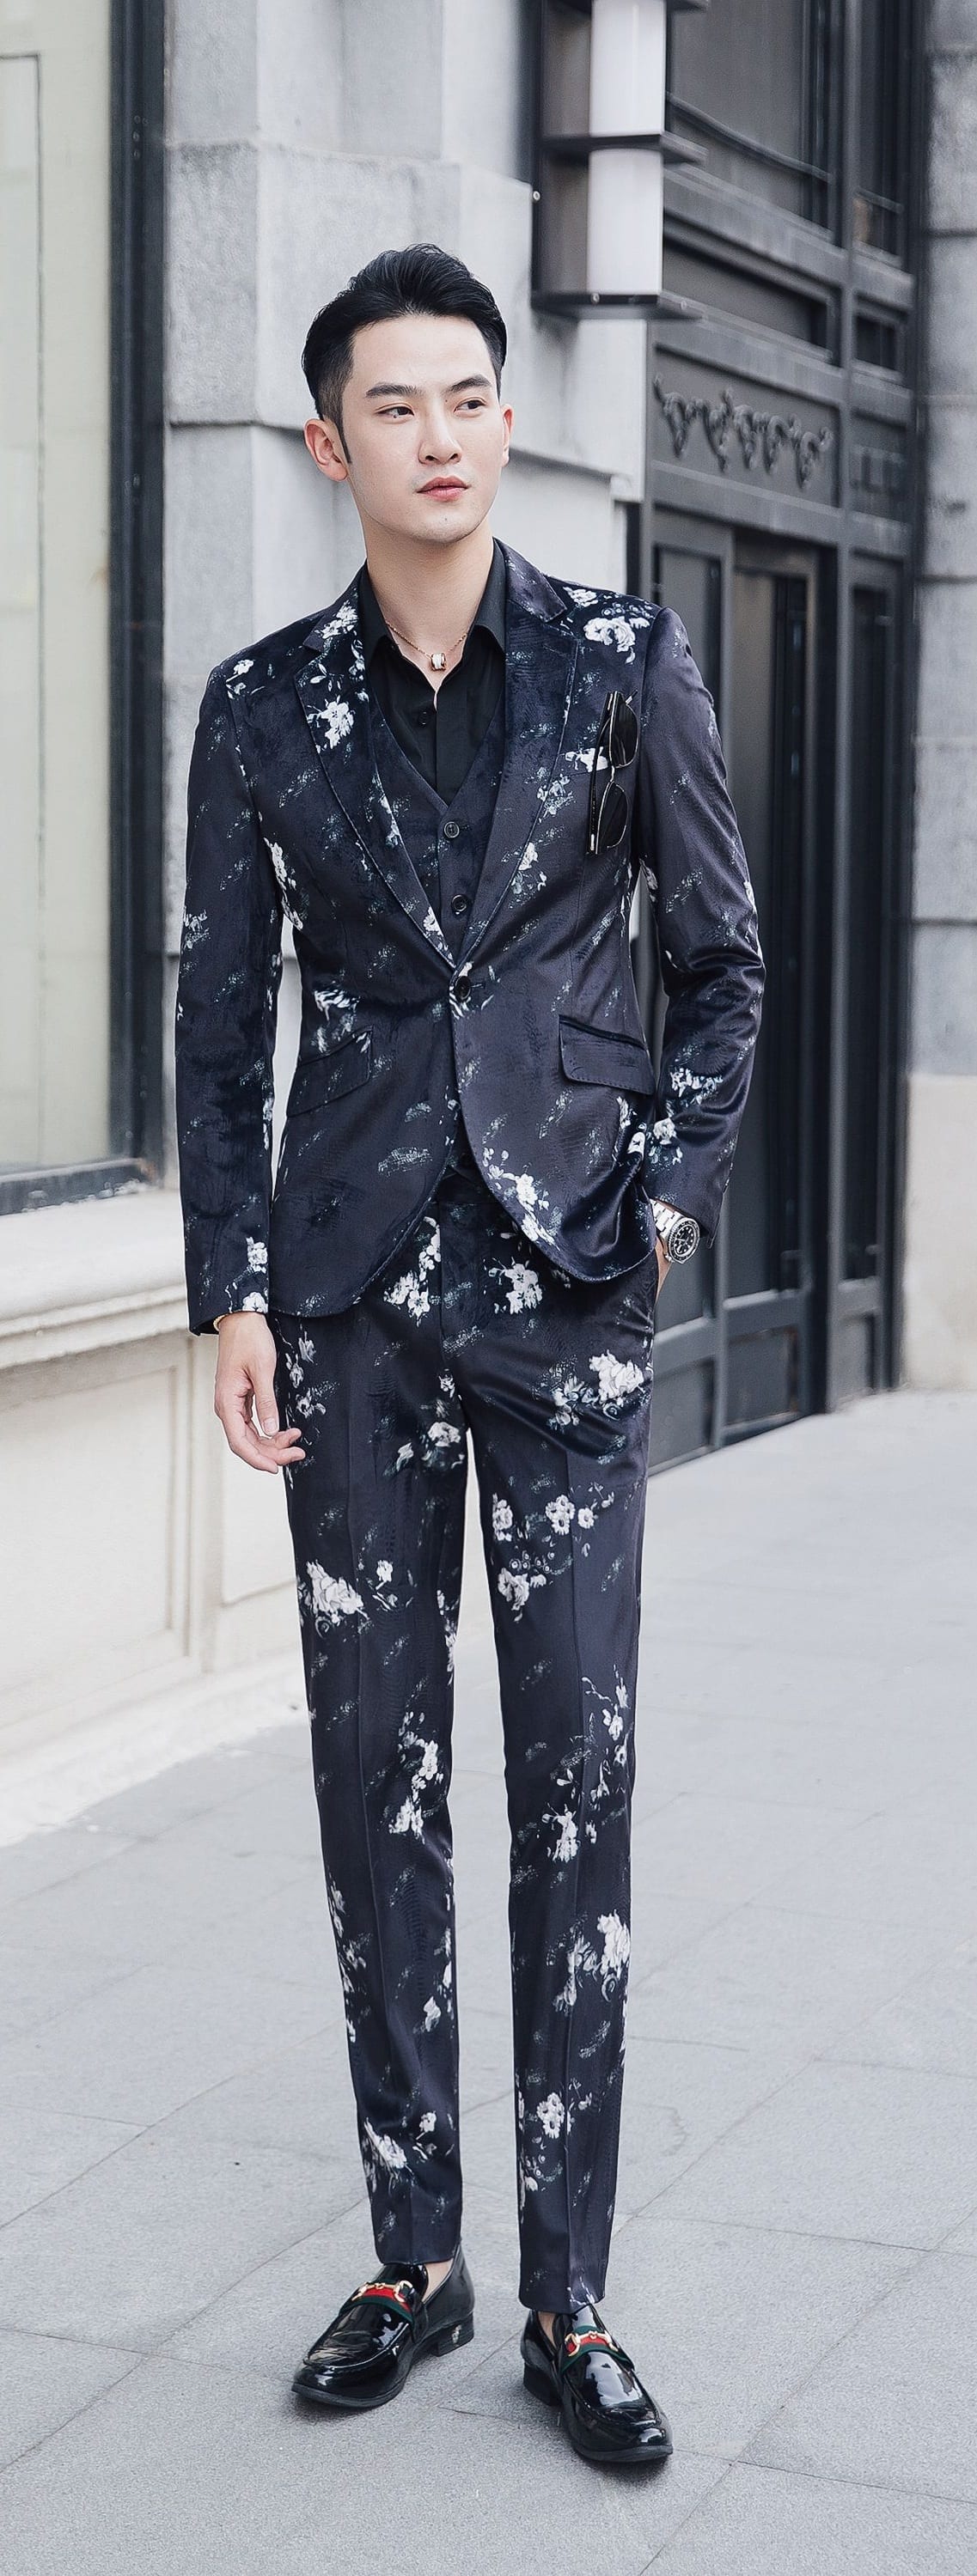 Summer Suits Ideas For Men To Try Now